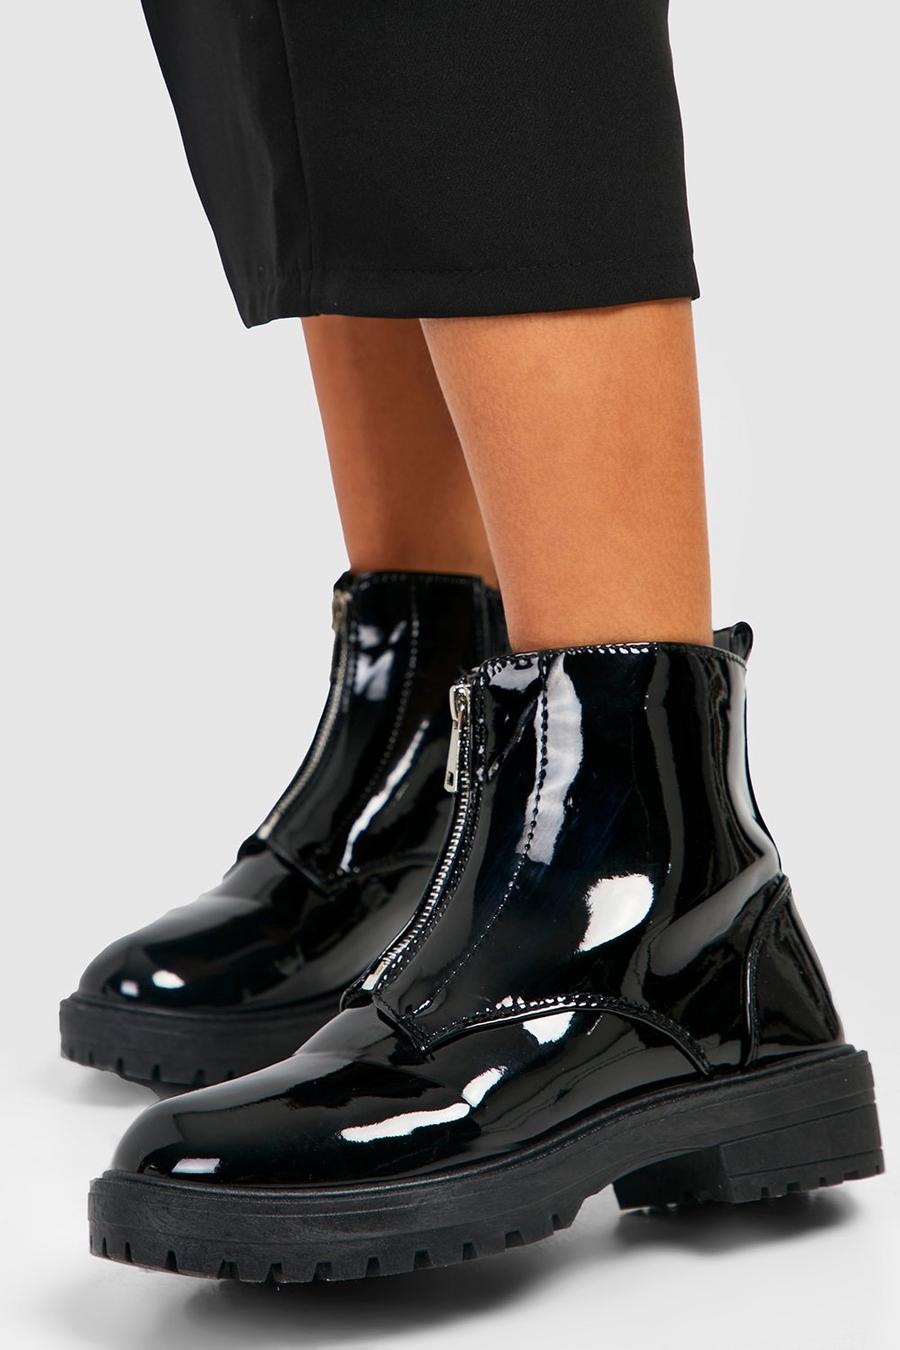 Black negro Zip Front Patent Flat Ankle Boots